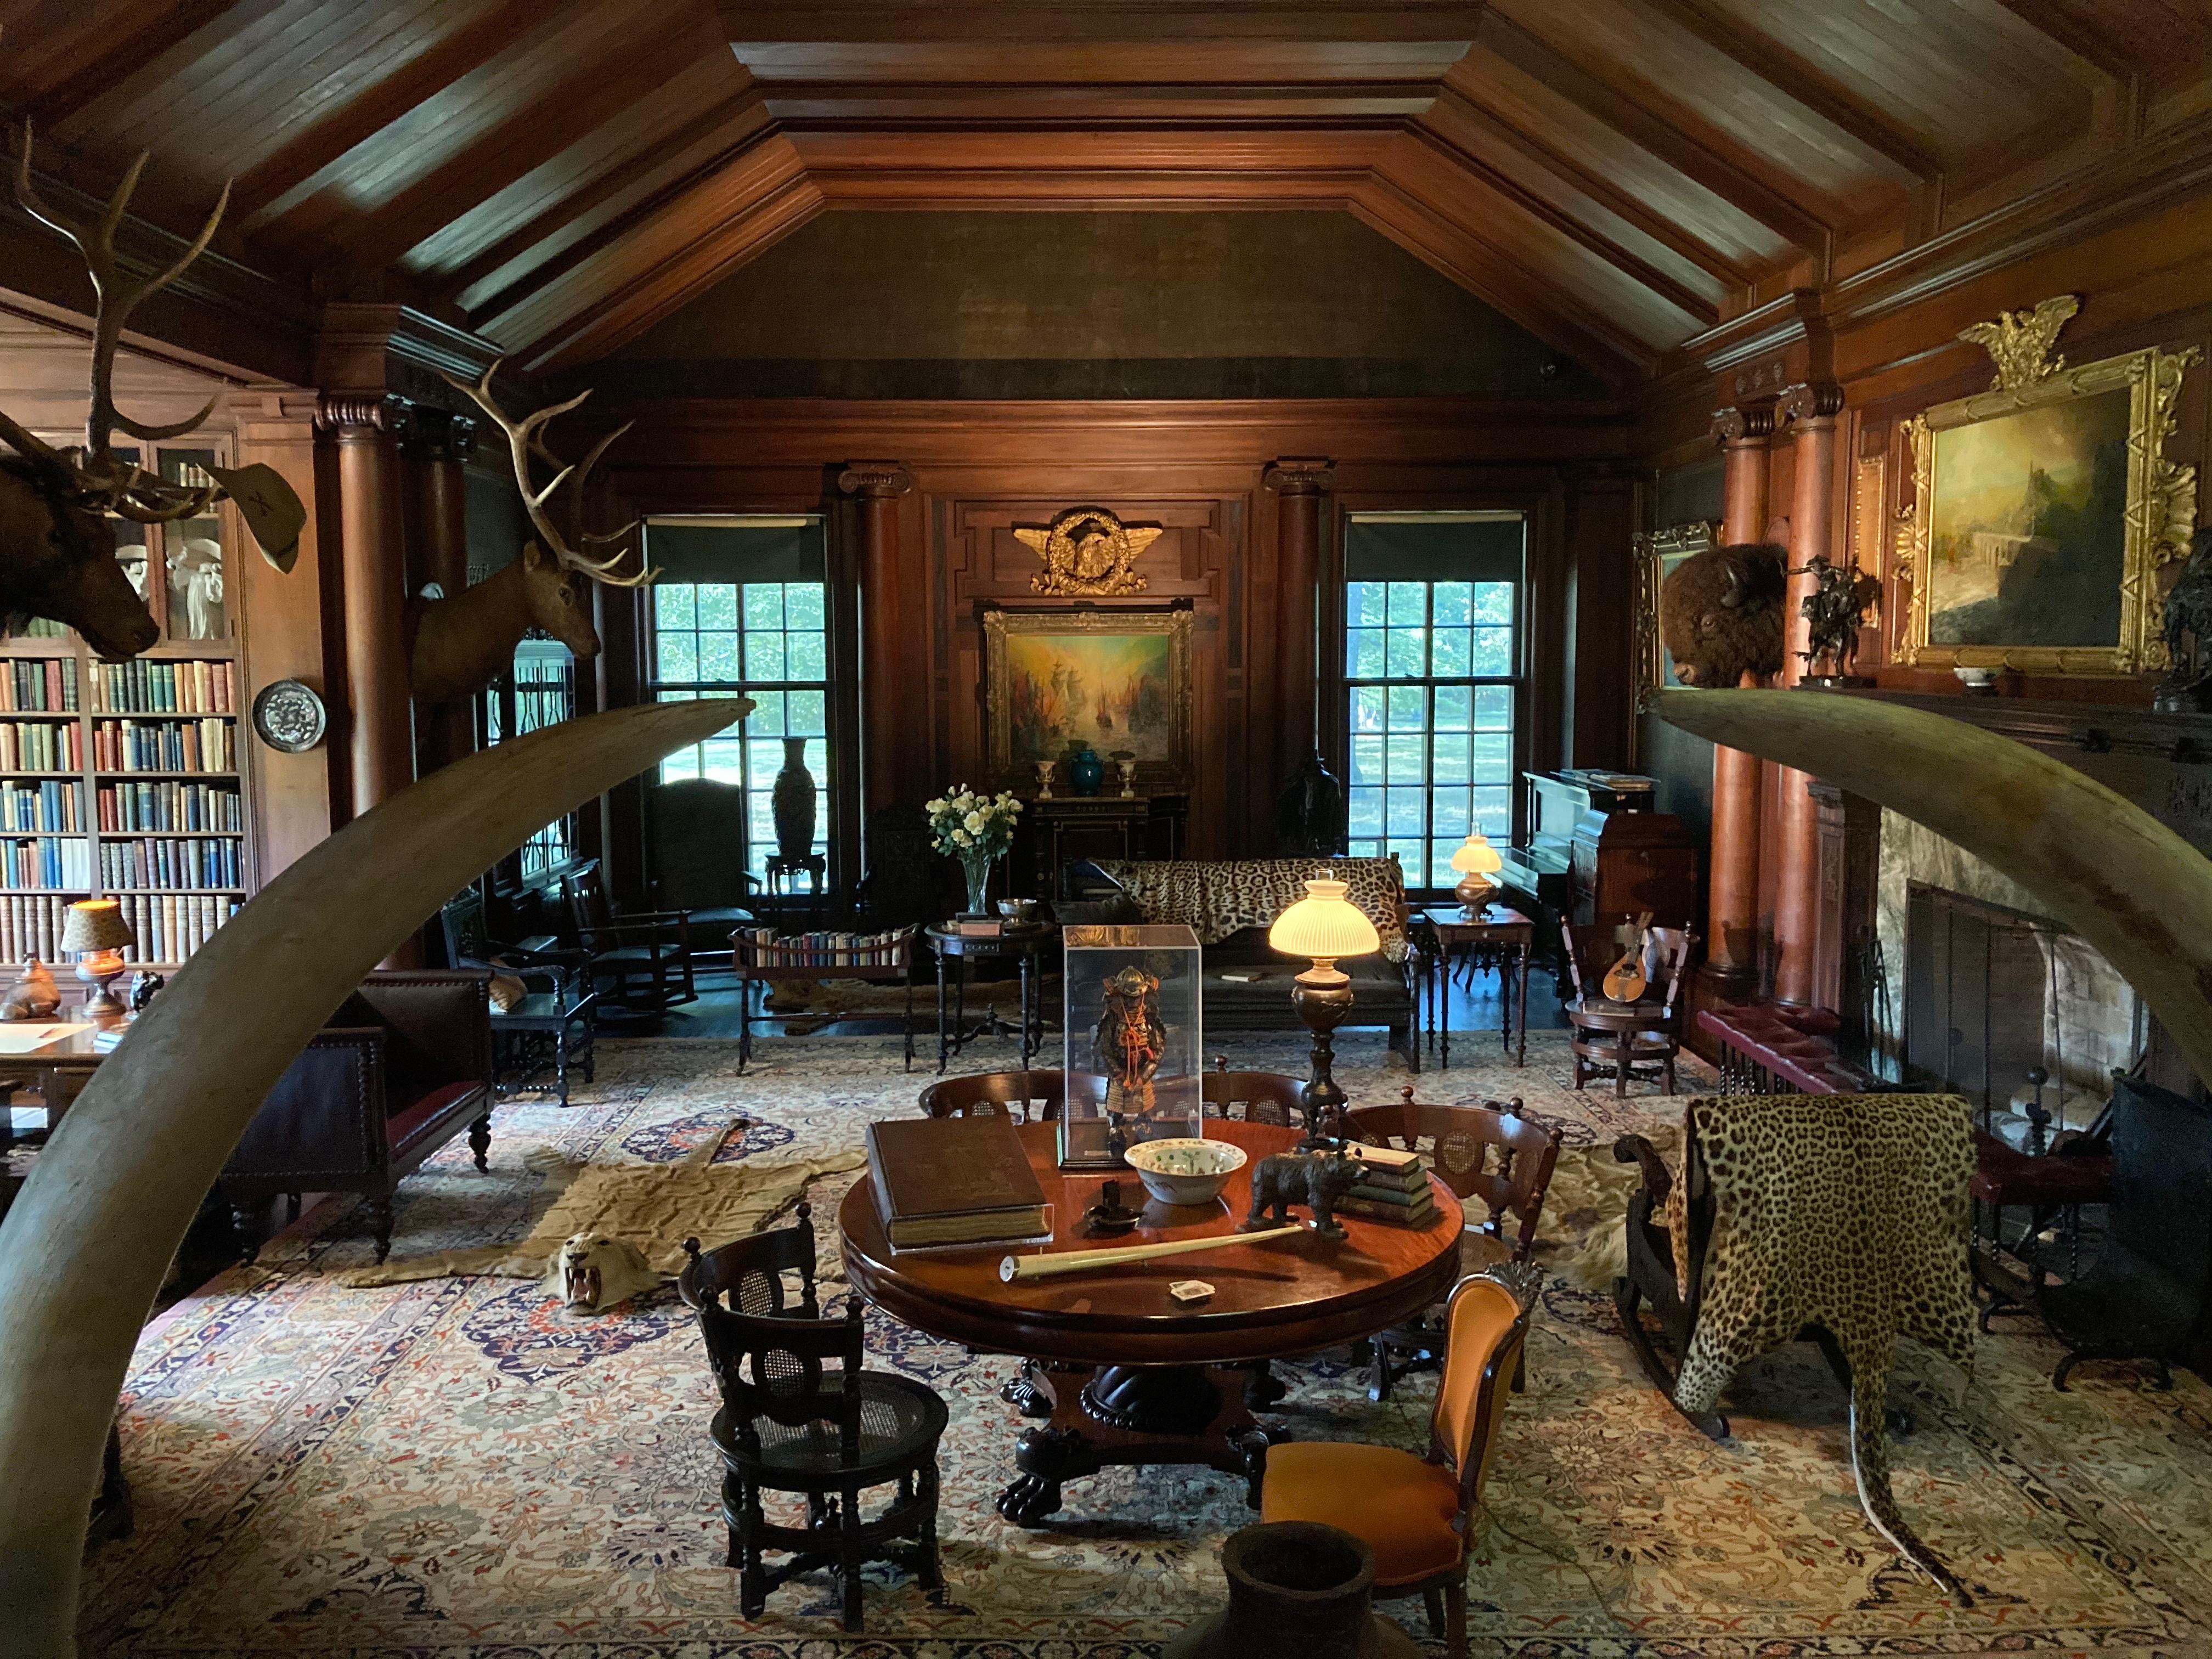 The North Room of the Theodore Roosevelt Home